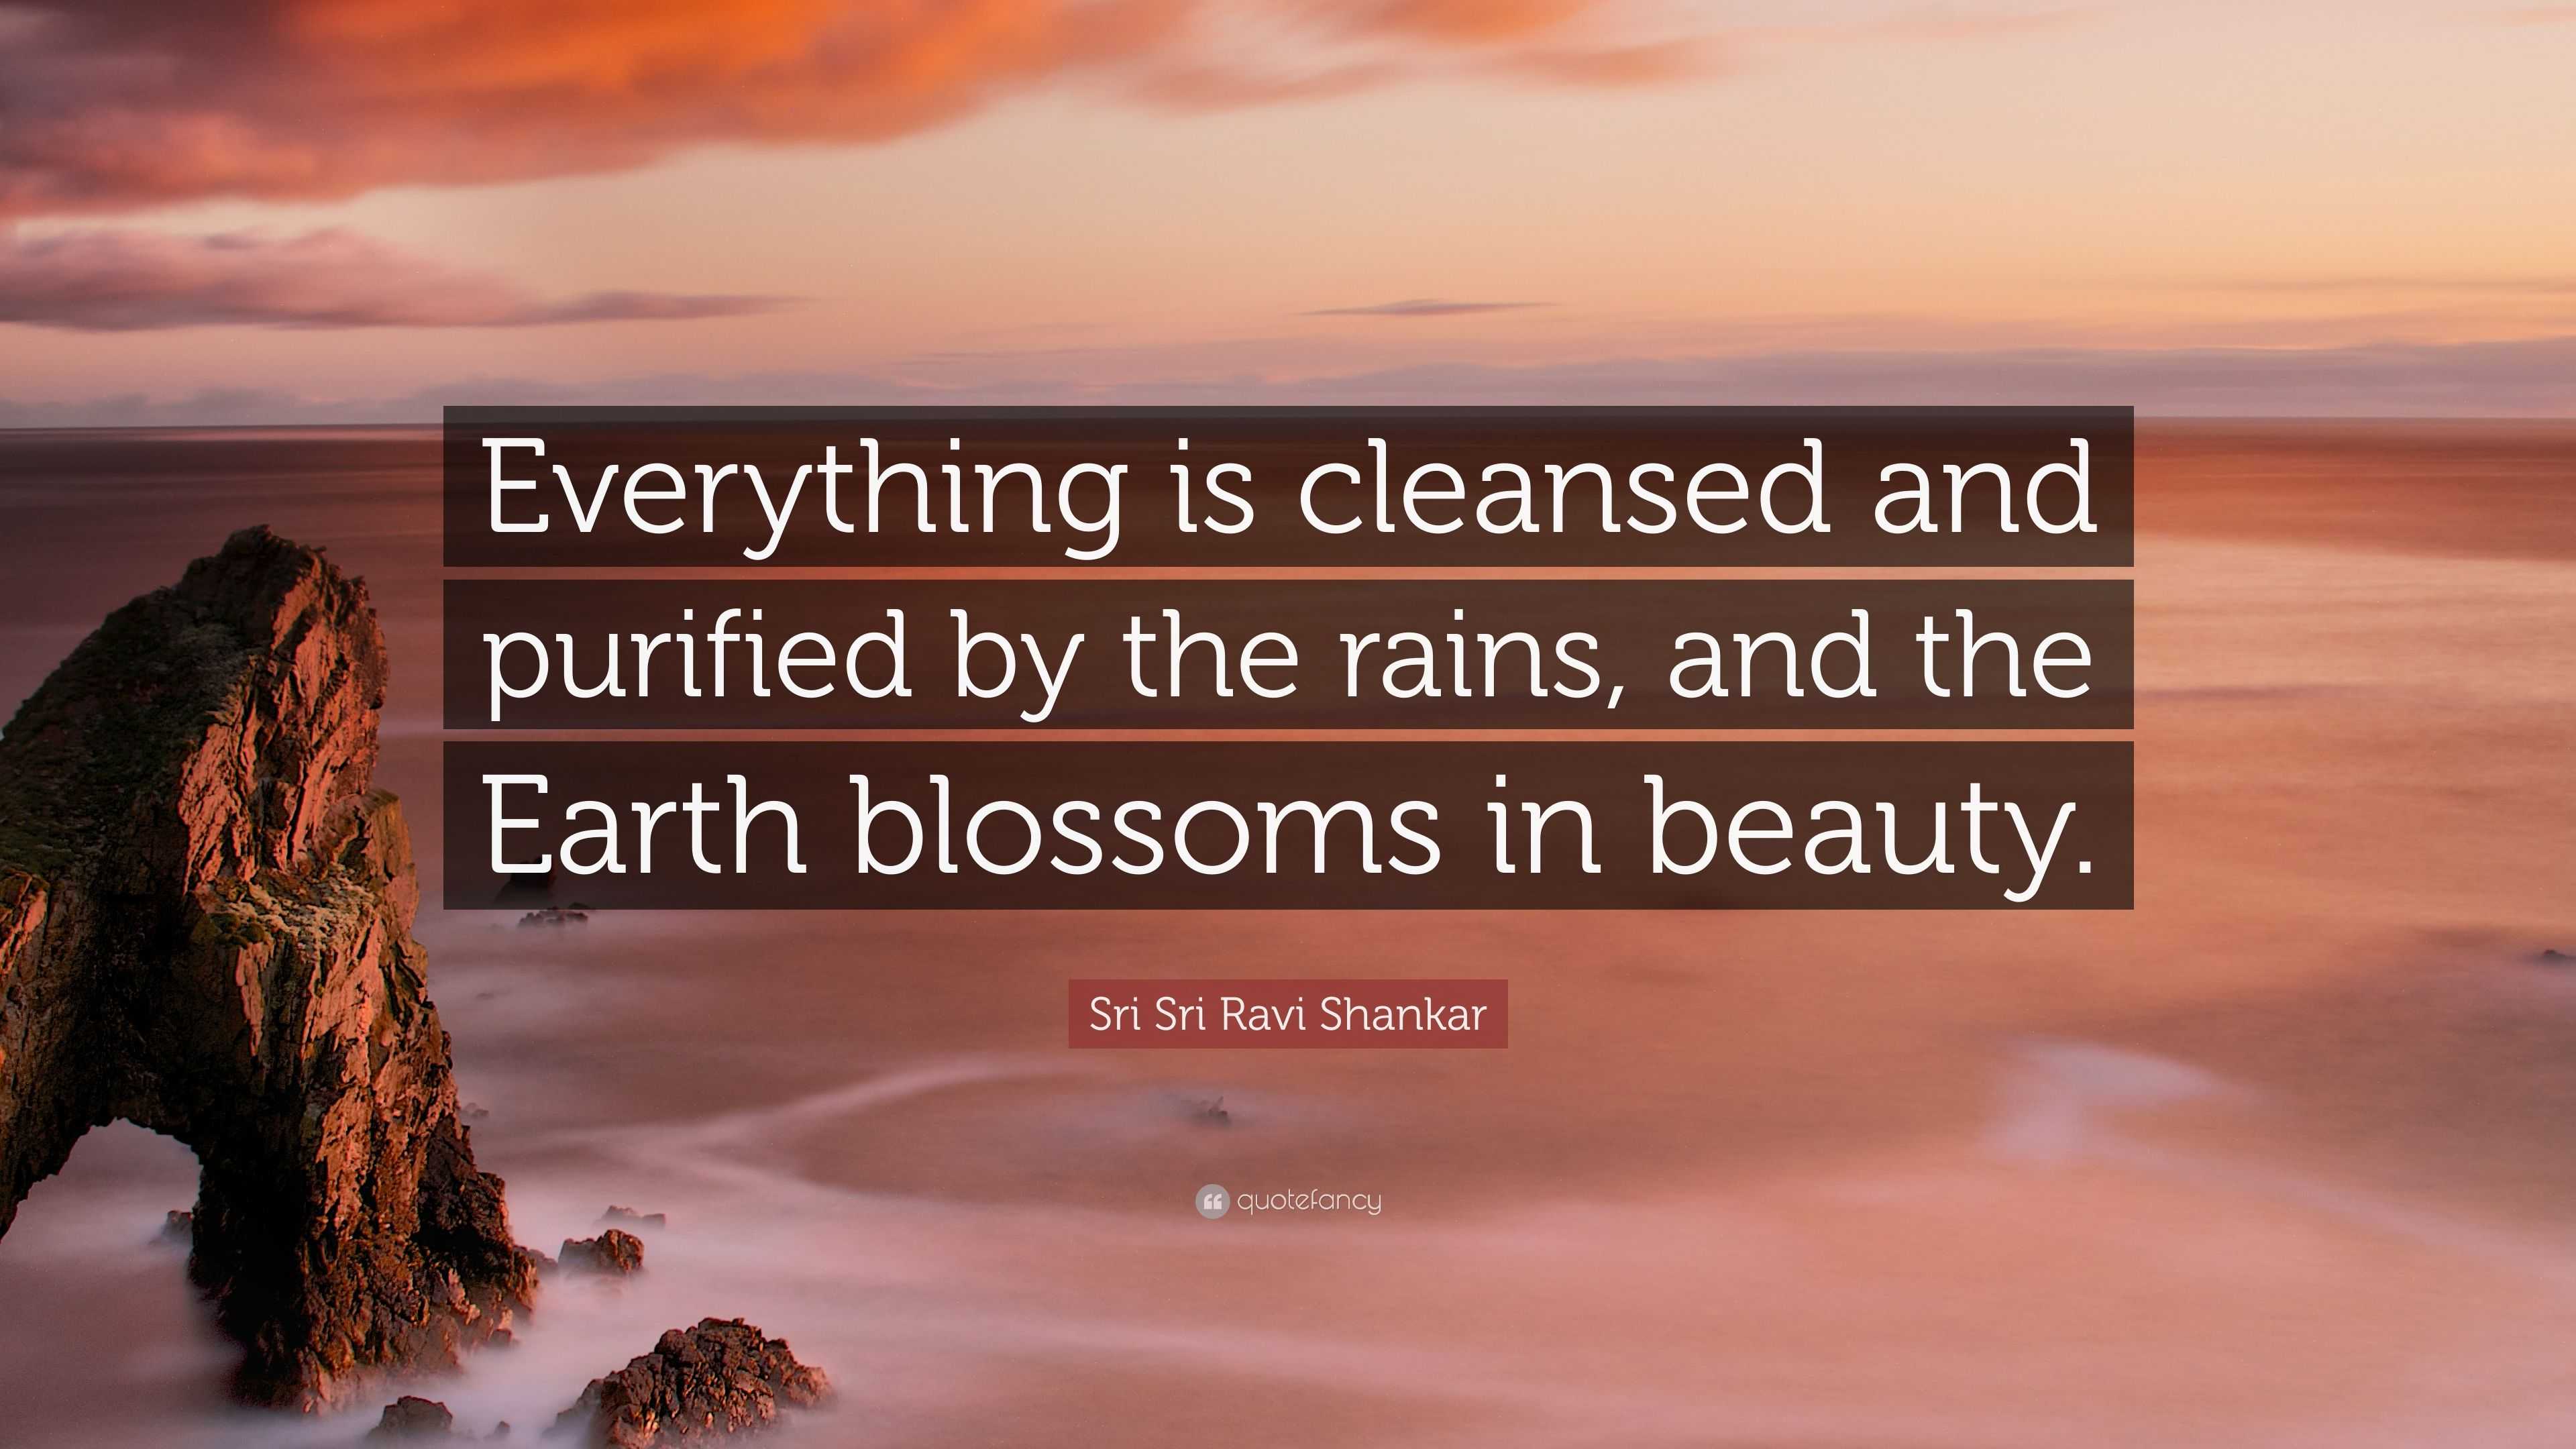 Sri Sri Ravi Shankar Quote: “Everything is cleansed and purified